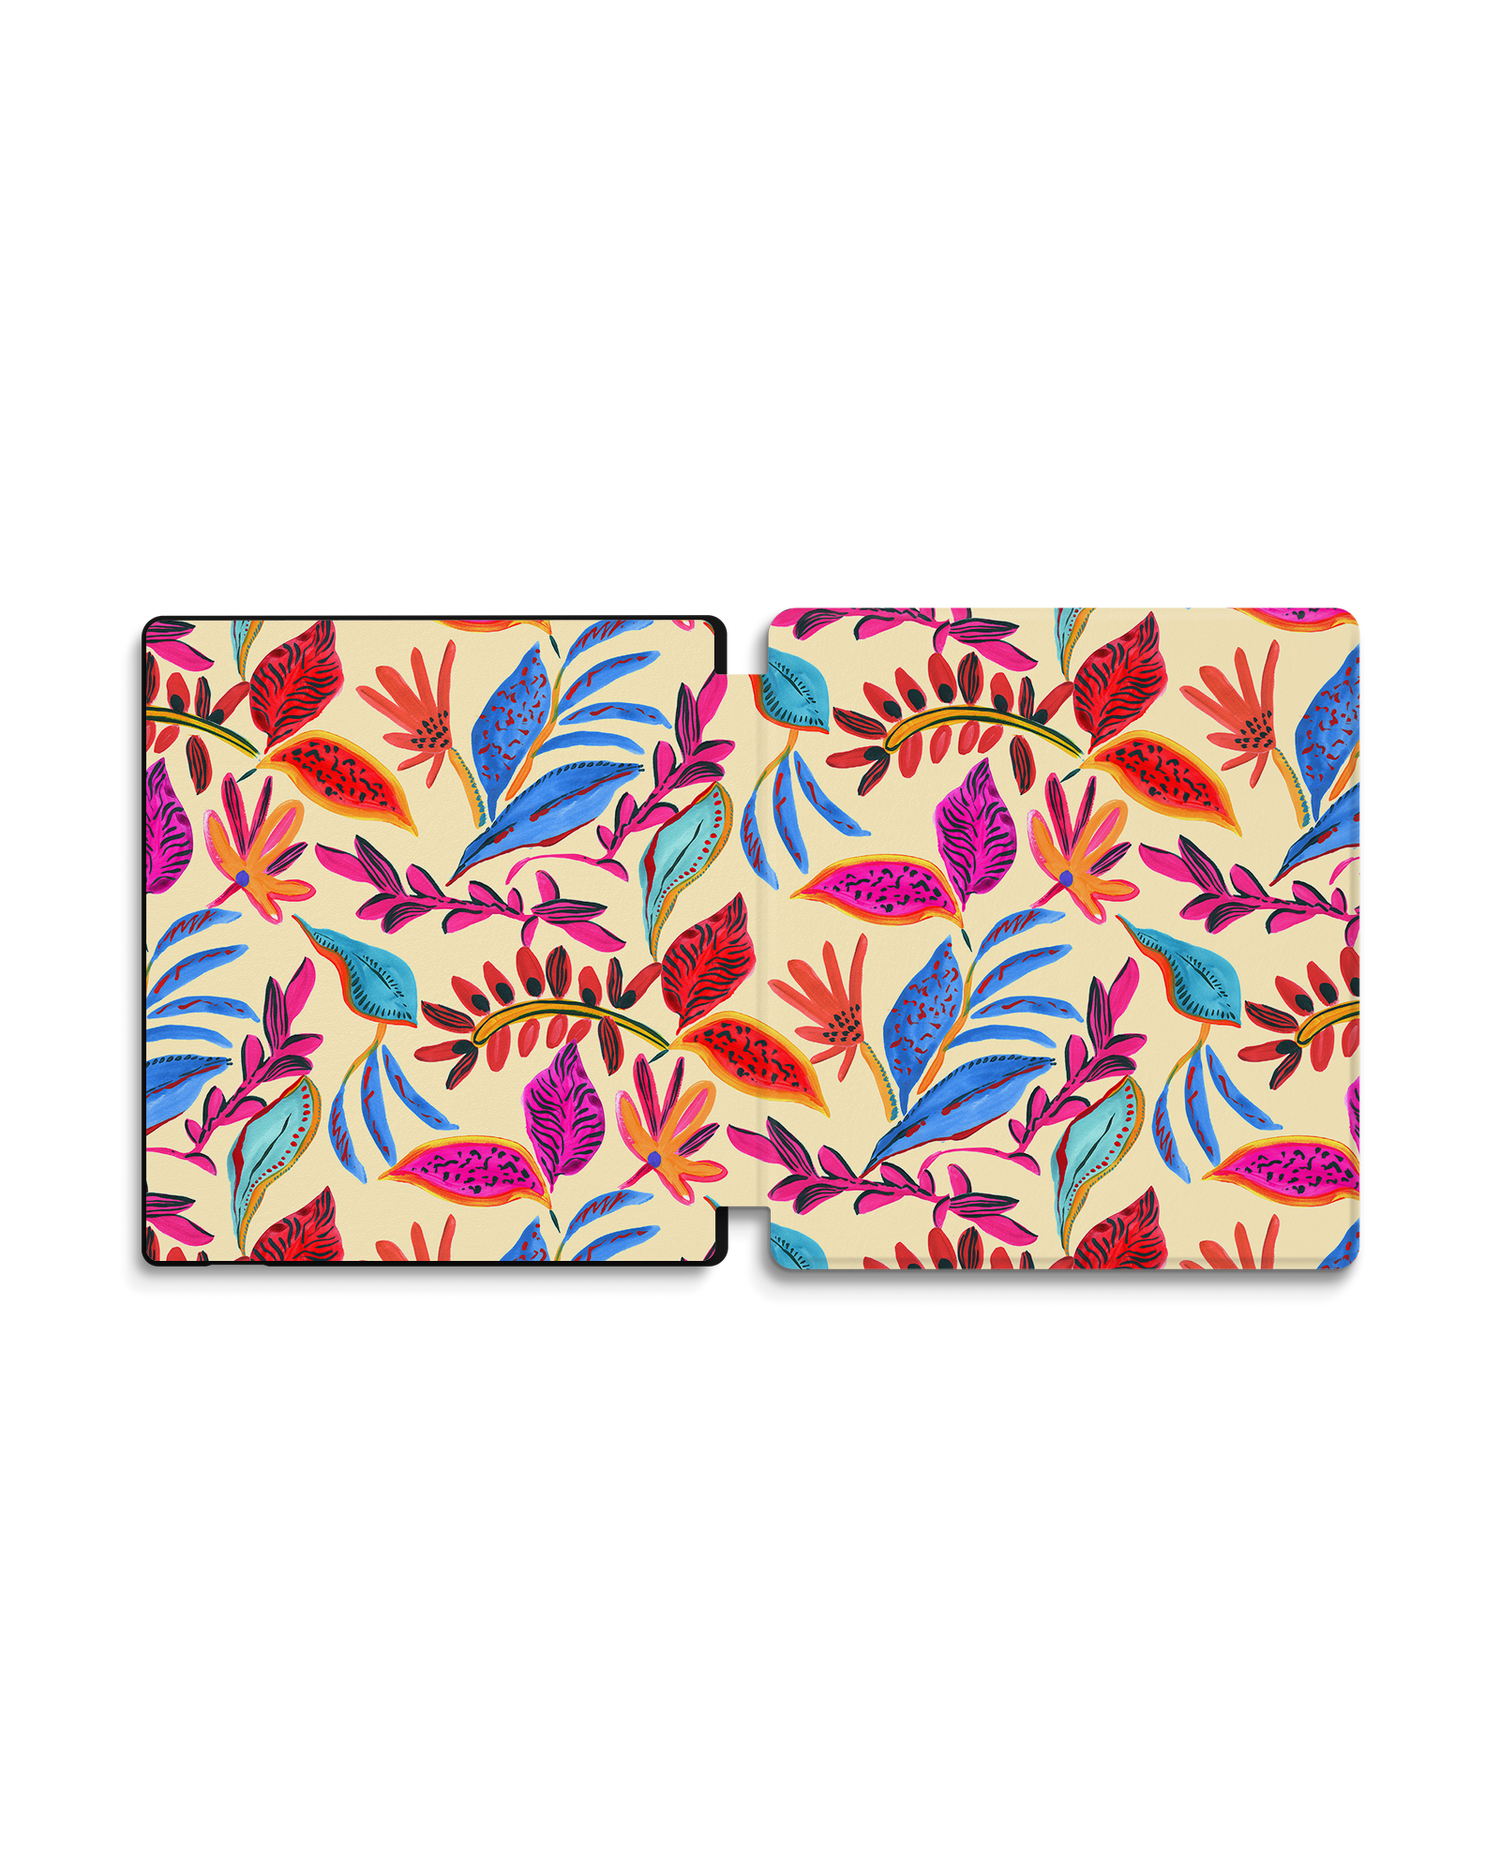 Painterly Spring Leaves eReader Smart Case for Amazon Kindle Oasis: Opened exterior view